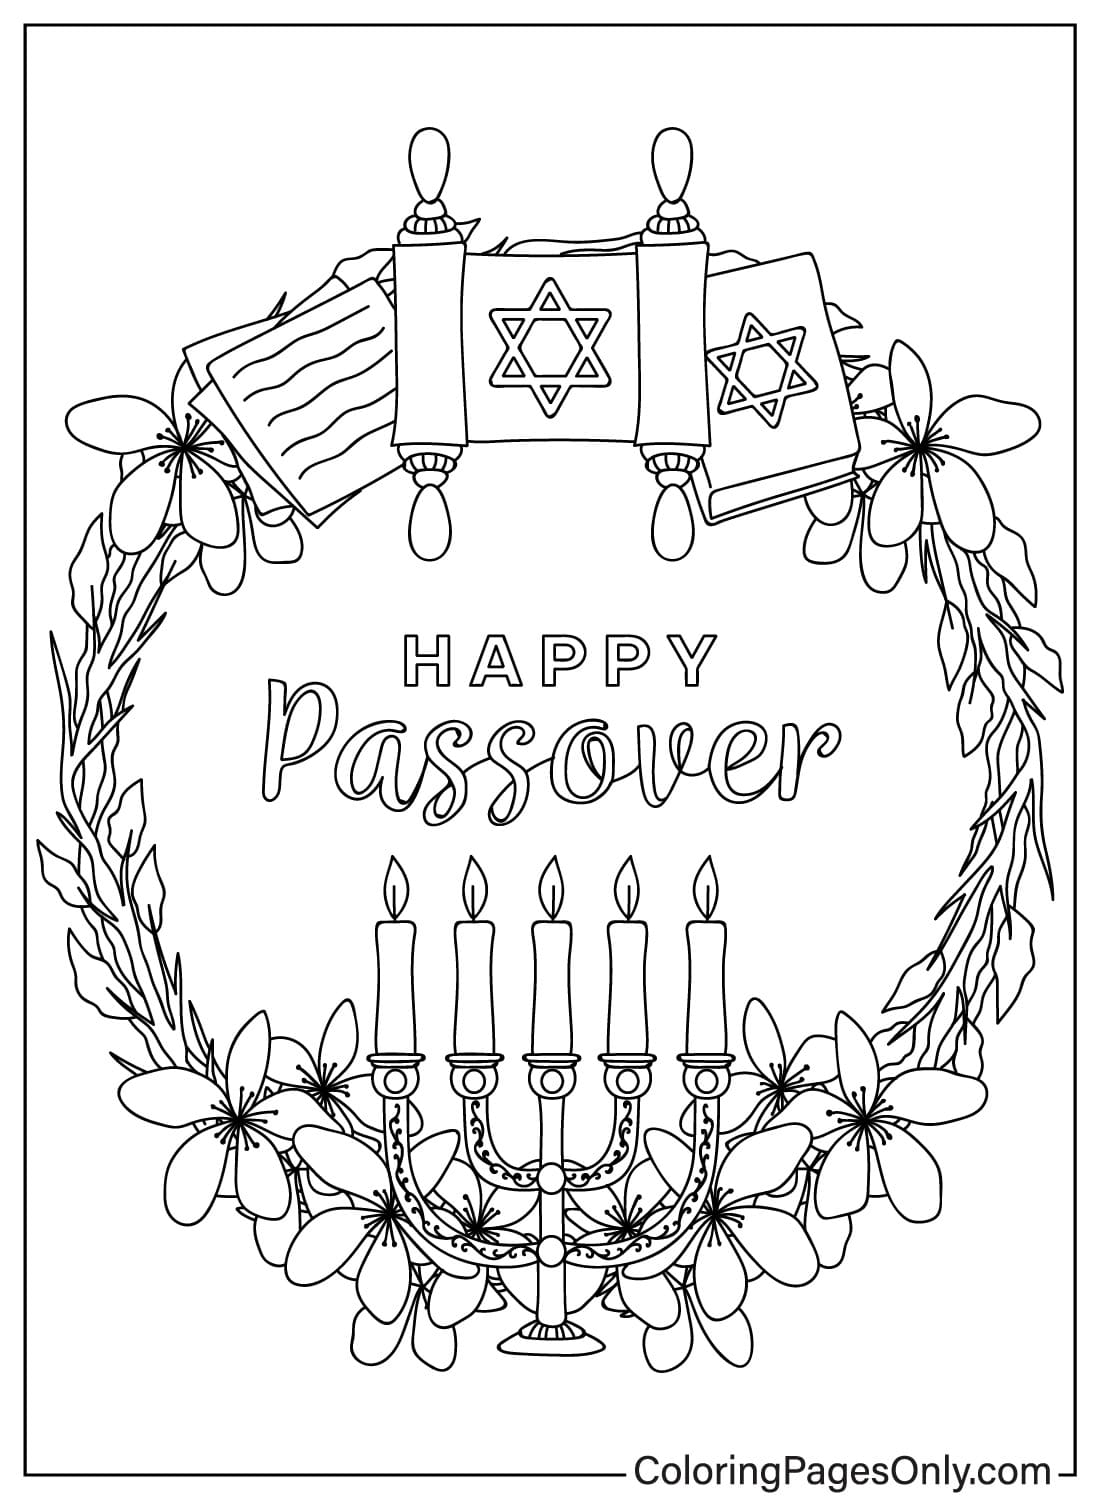 Passover Coloring Sheet from Passover